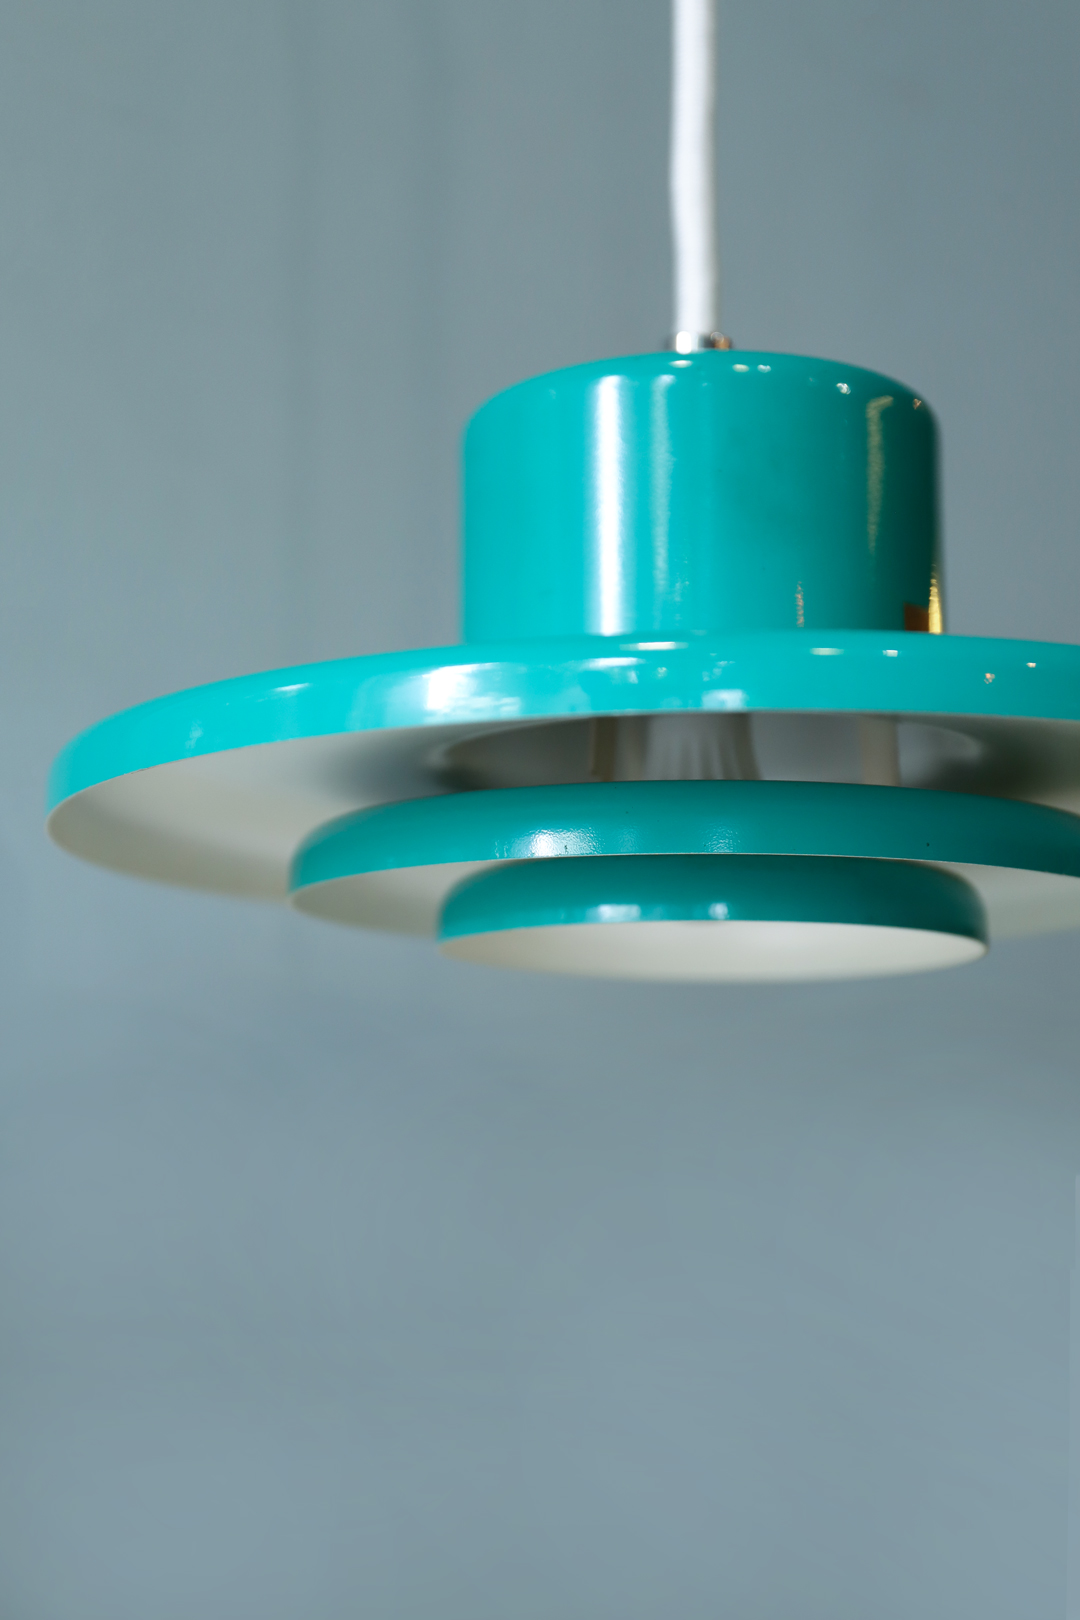 Japanese Vintage National Pendant Light/ナショナル ペンダントライト ヴィンテージ レトロ 照明 北欧モダン